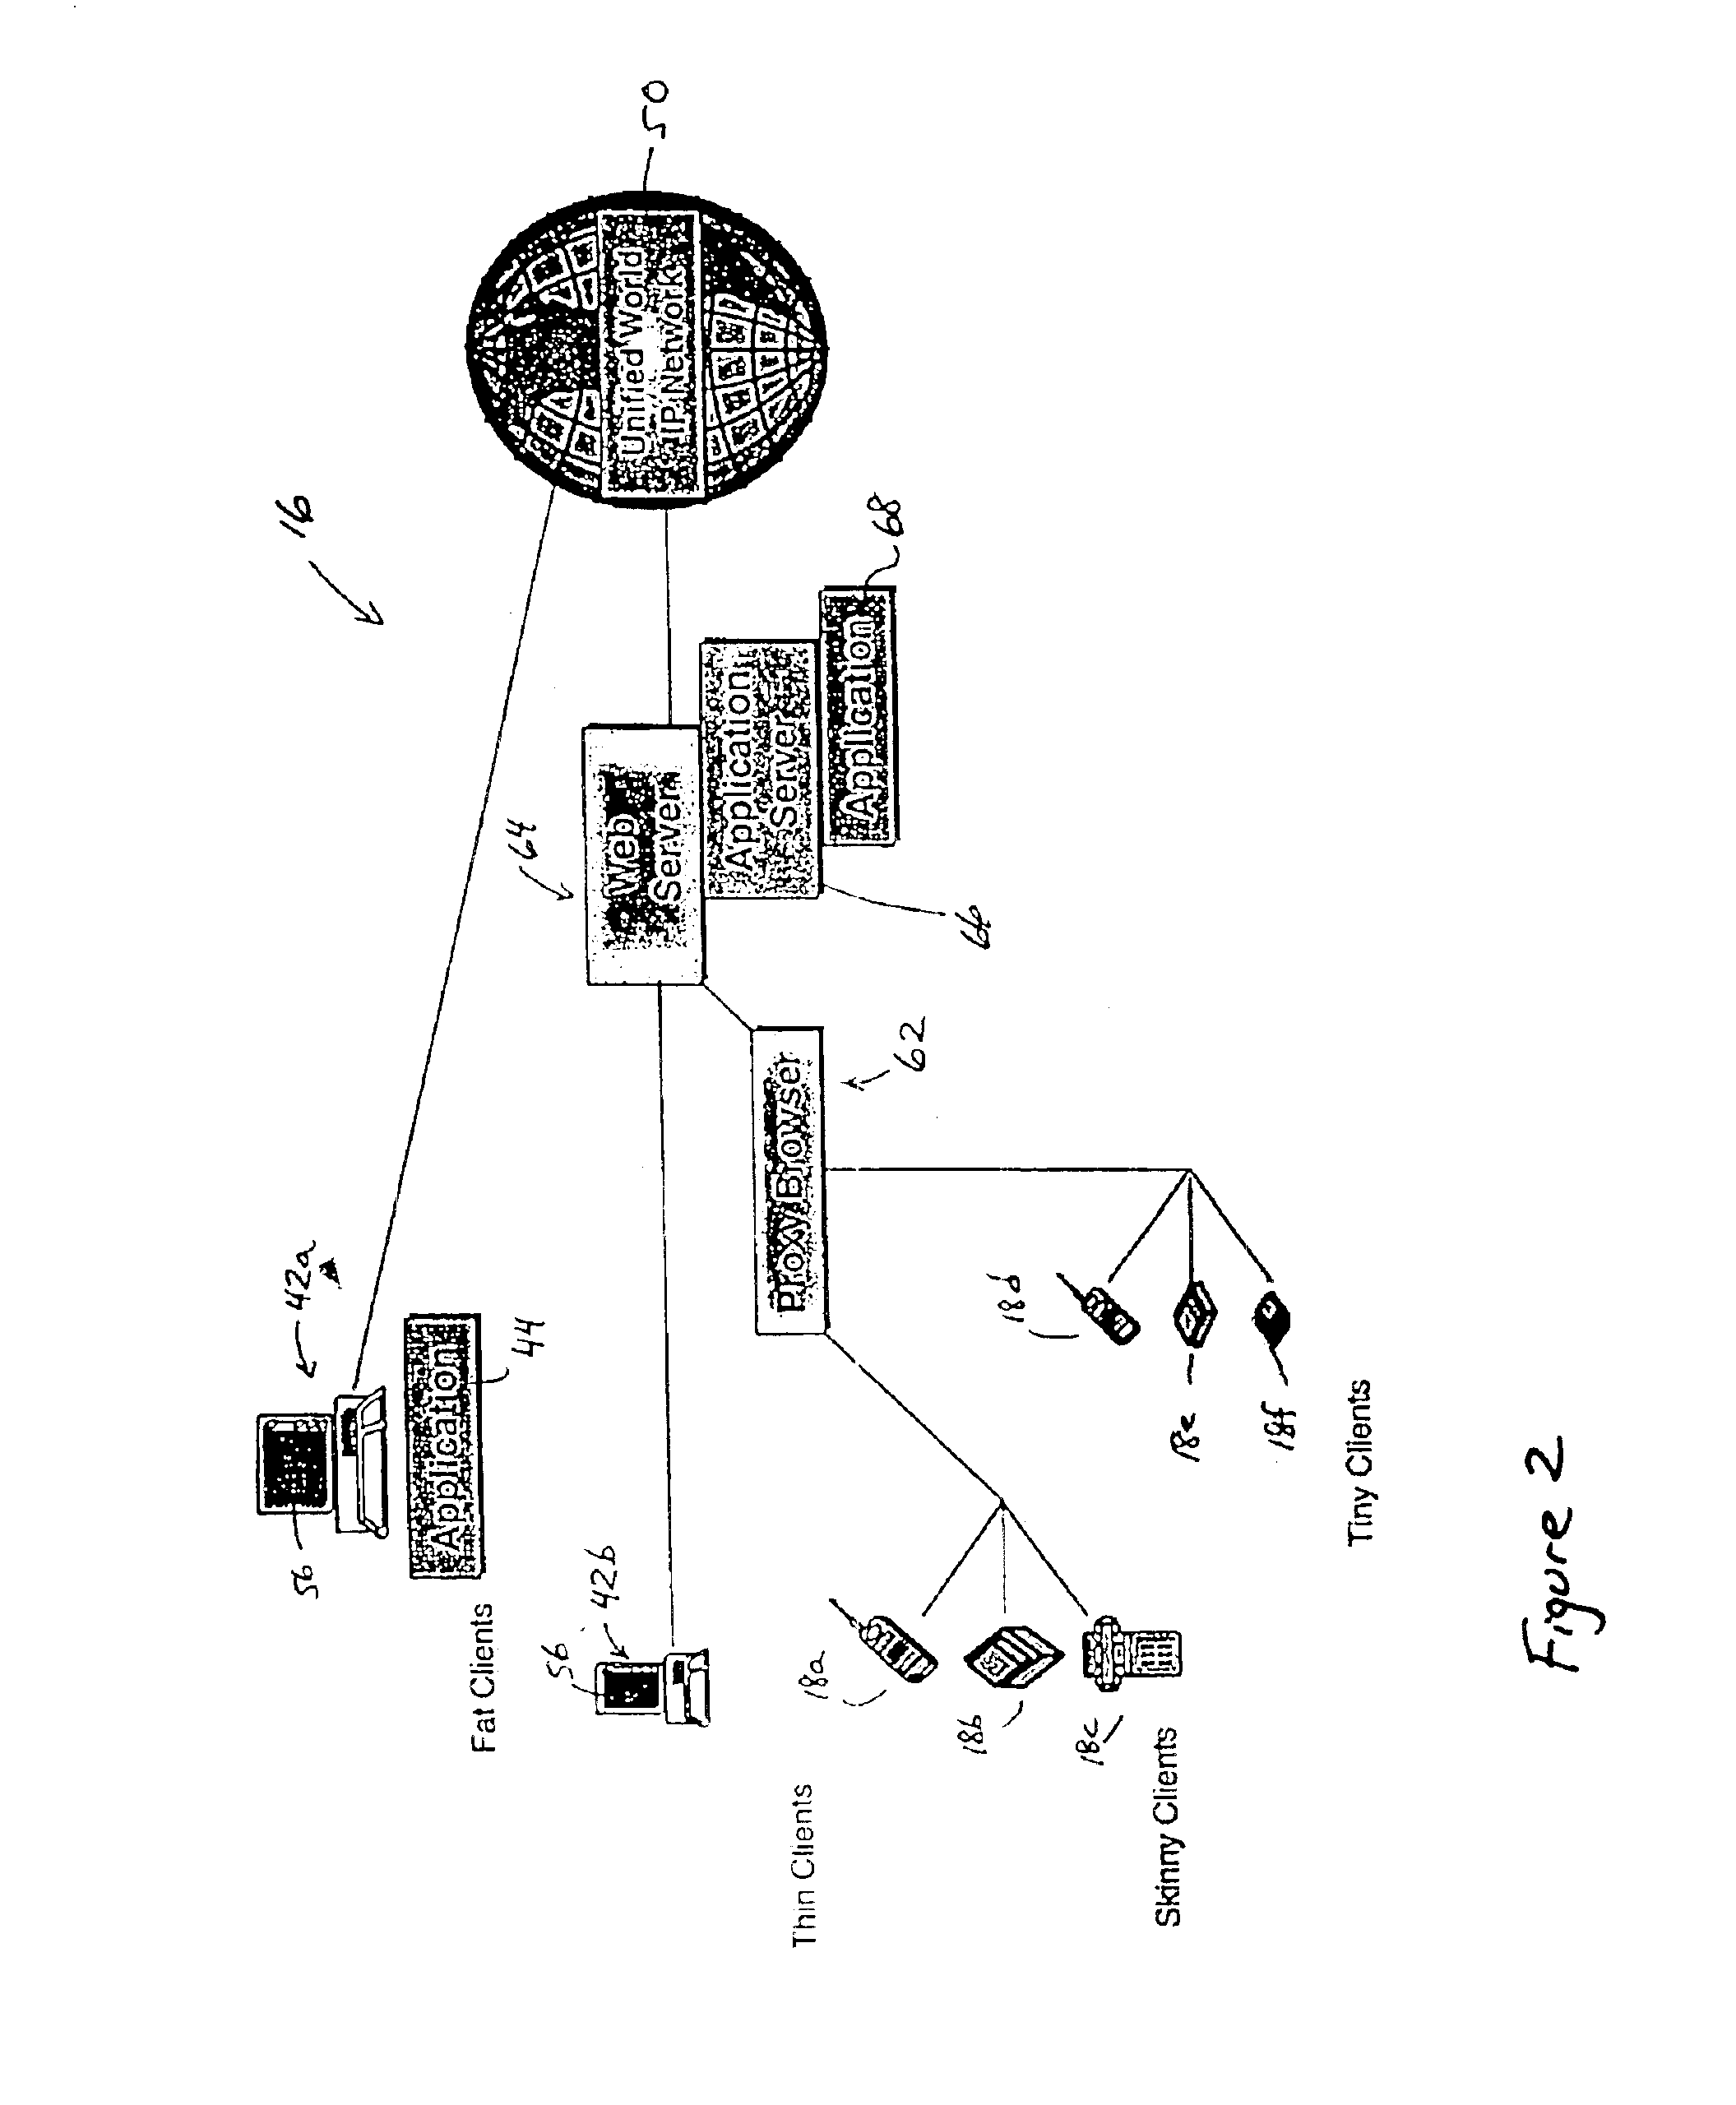 Arrangement for accessing an IP-based messaging server by telephone for management of stored messages